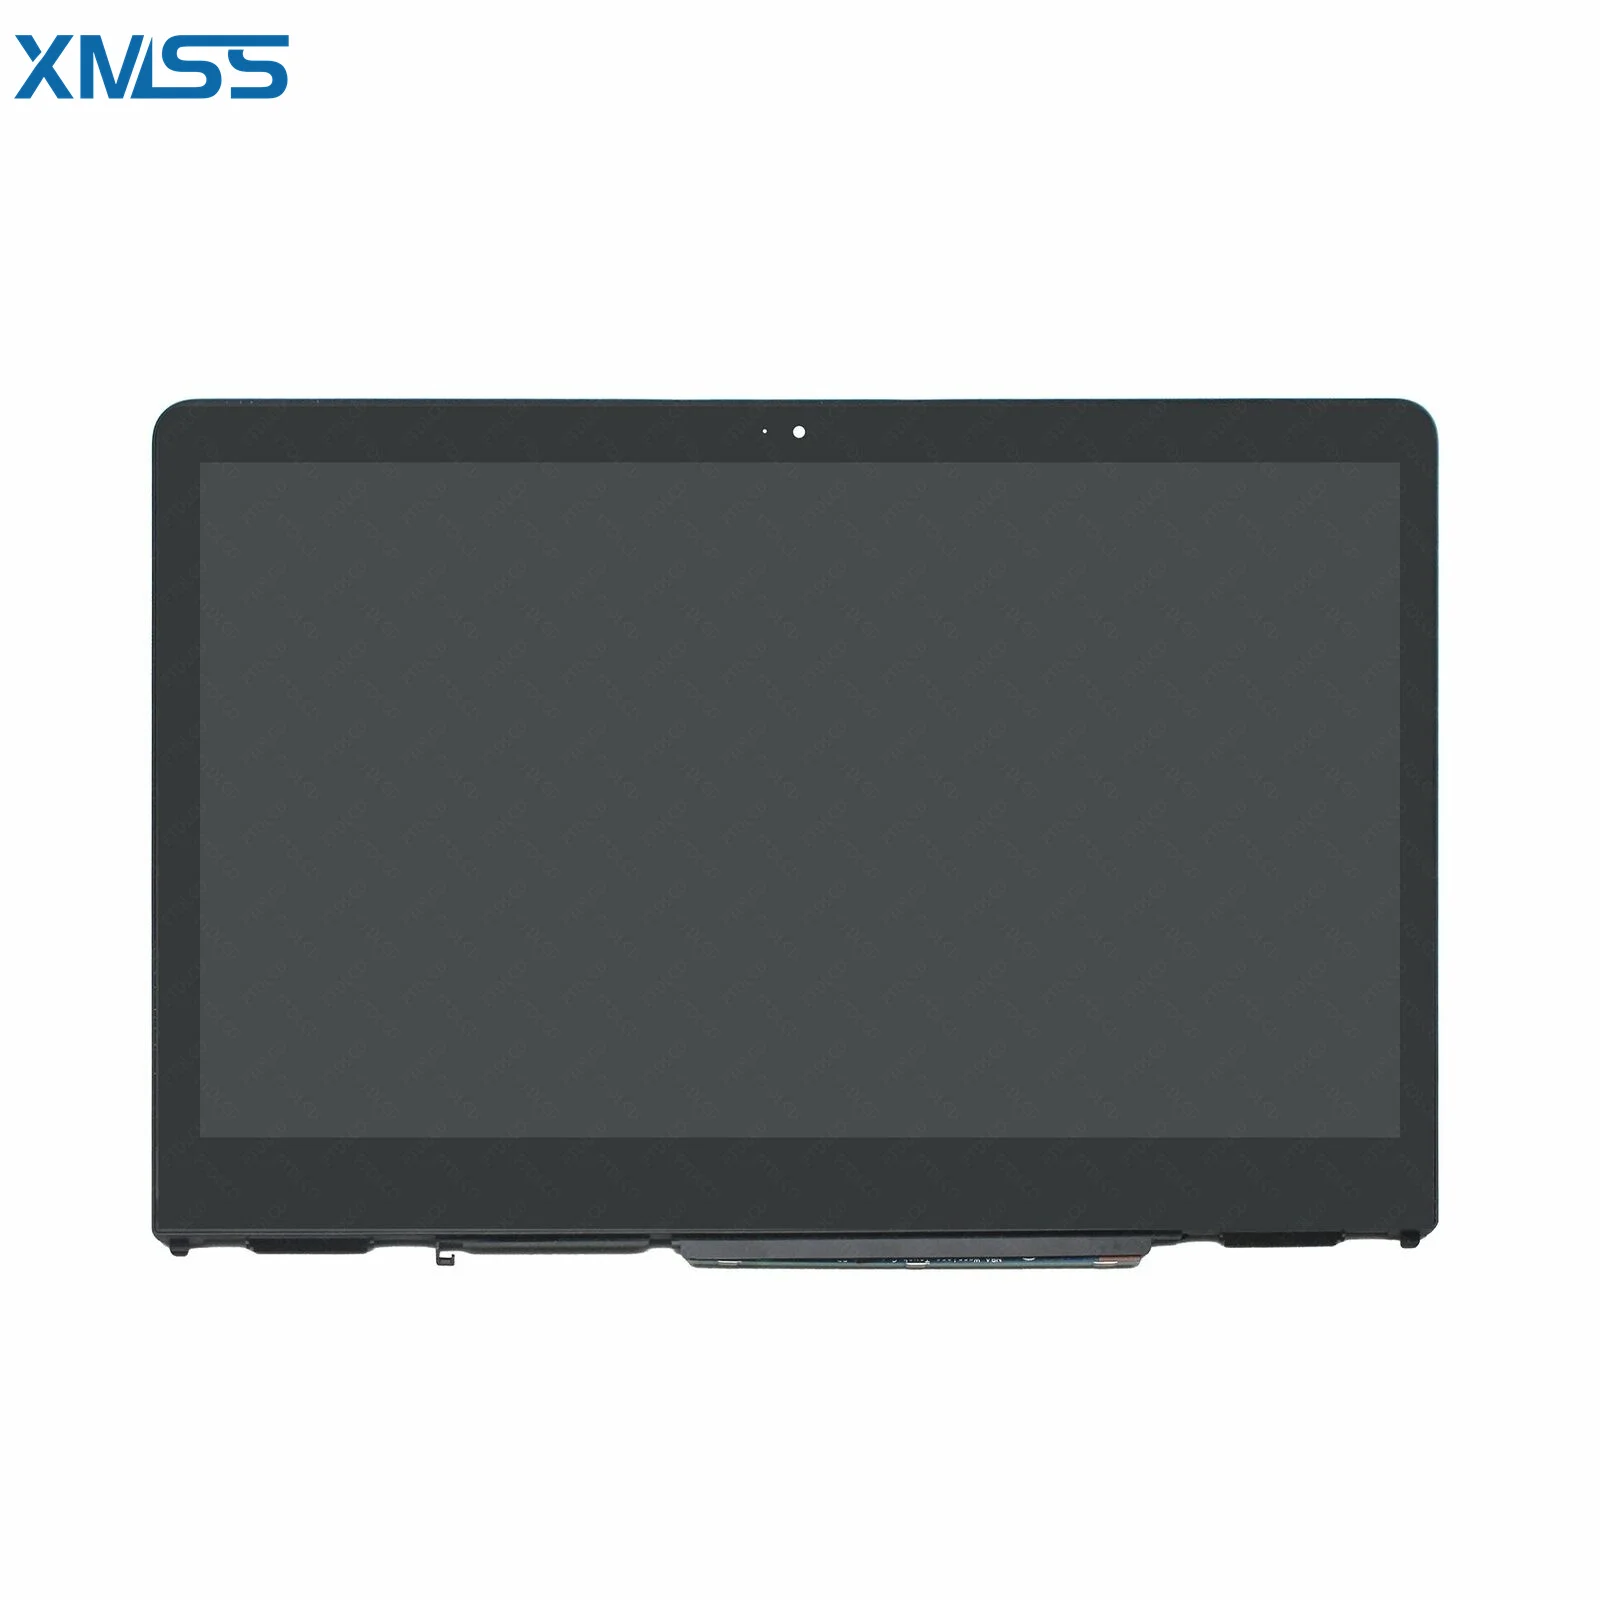 

LED LCD Touch Screen Digitizer Assembly + Bezel For HP Pavilion X360 14m-ba011DX